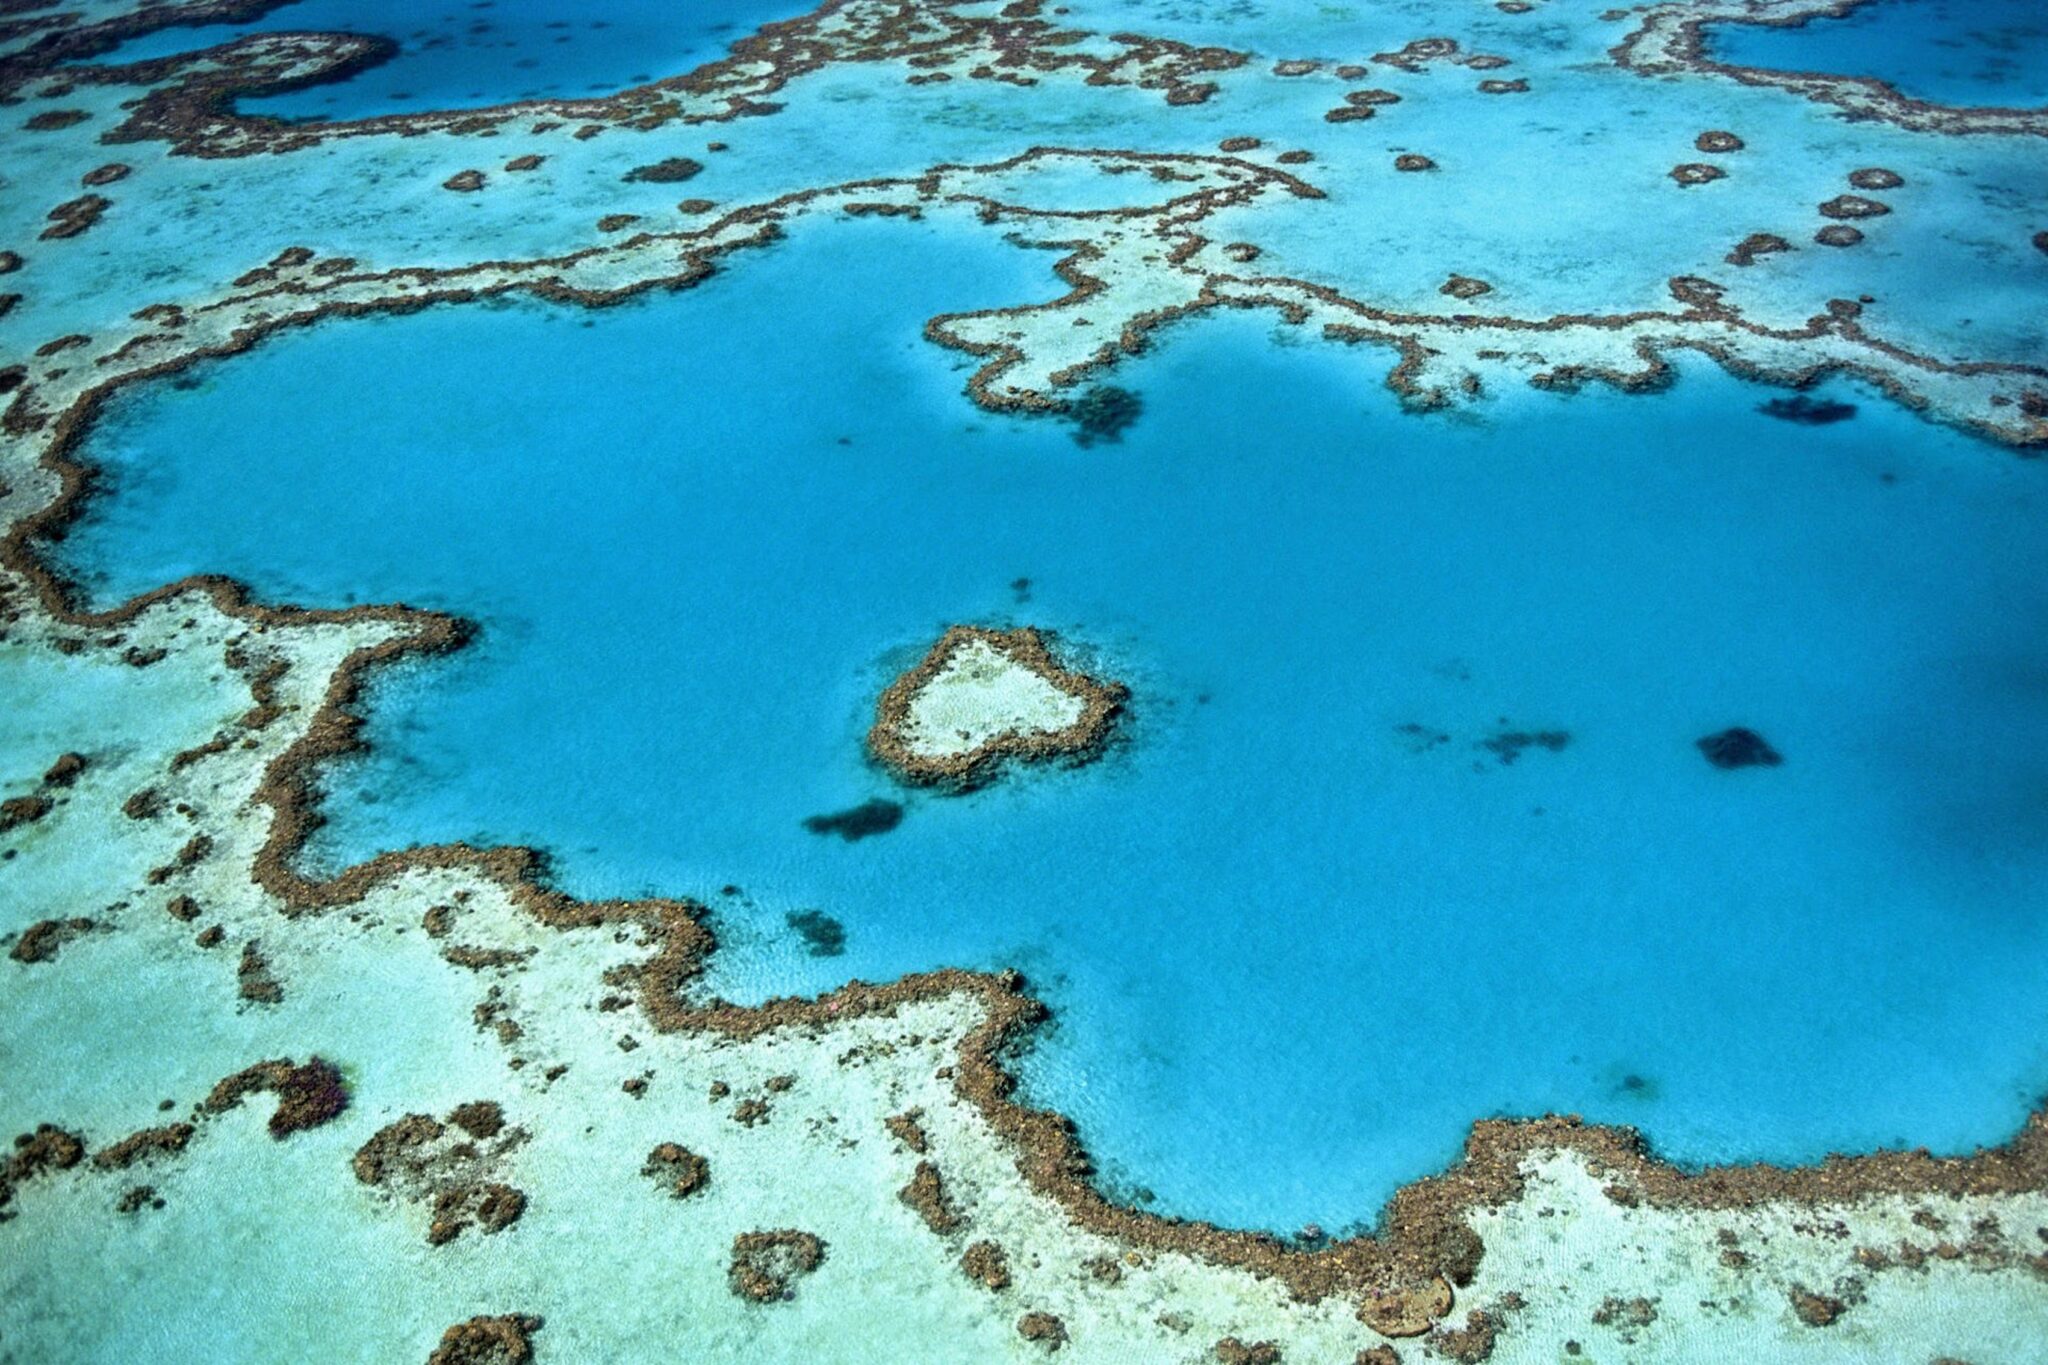 The Great Barrier Reef’s Mass Bleaching Disaster: Can Ecotourism Help?